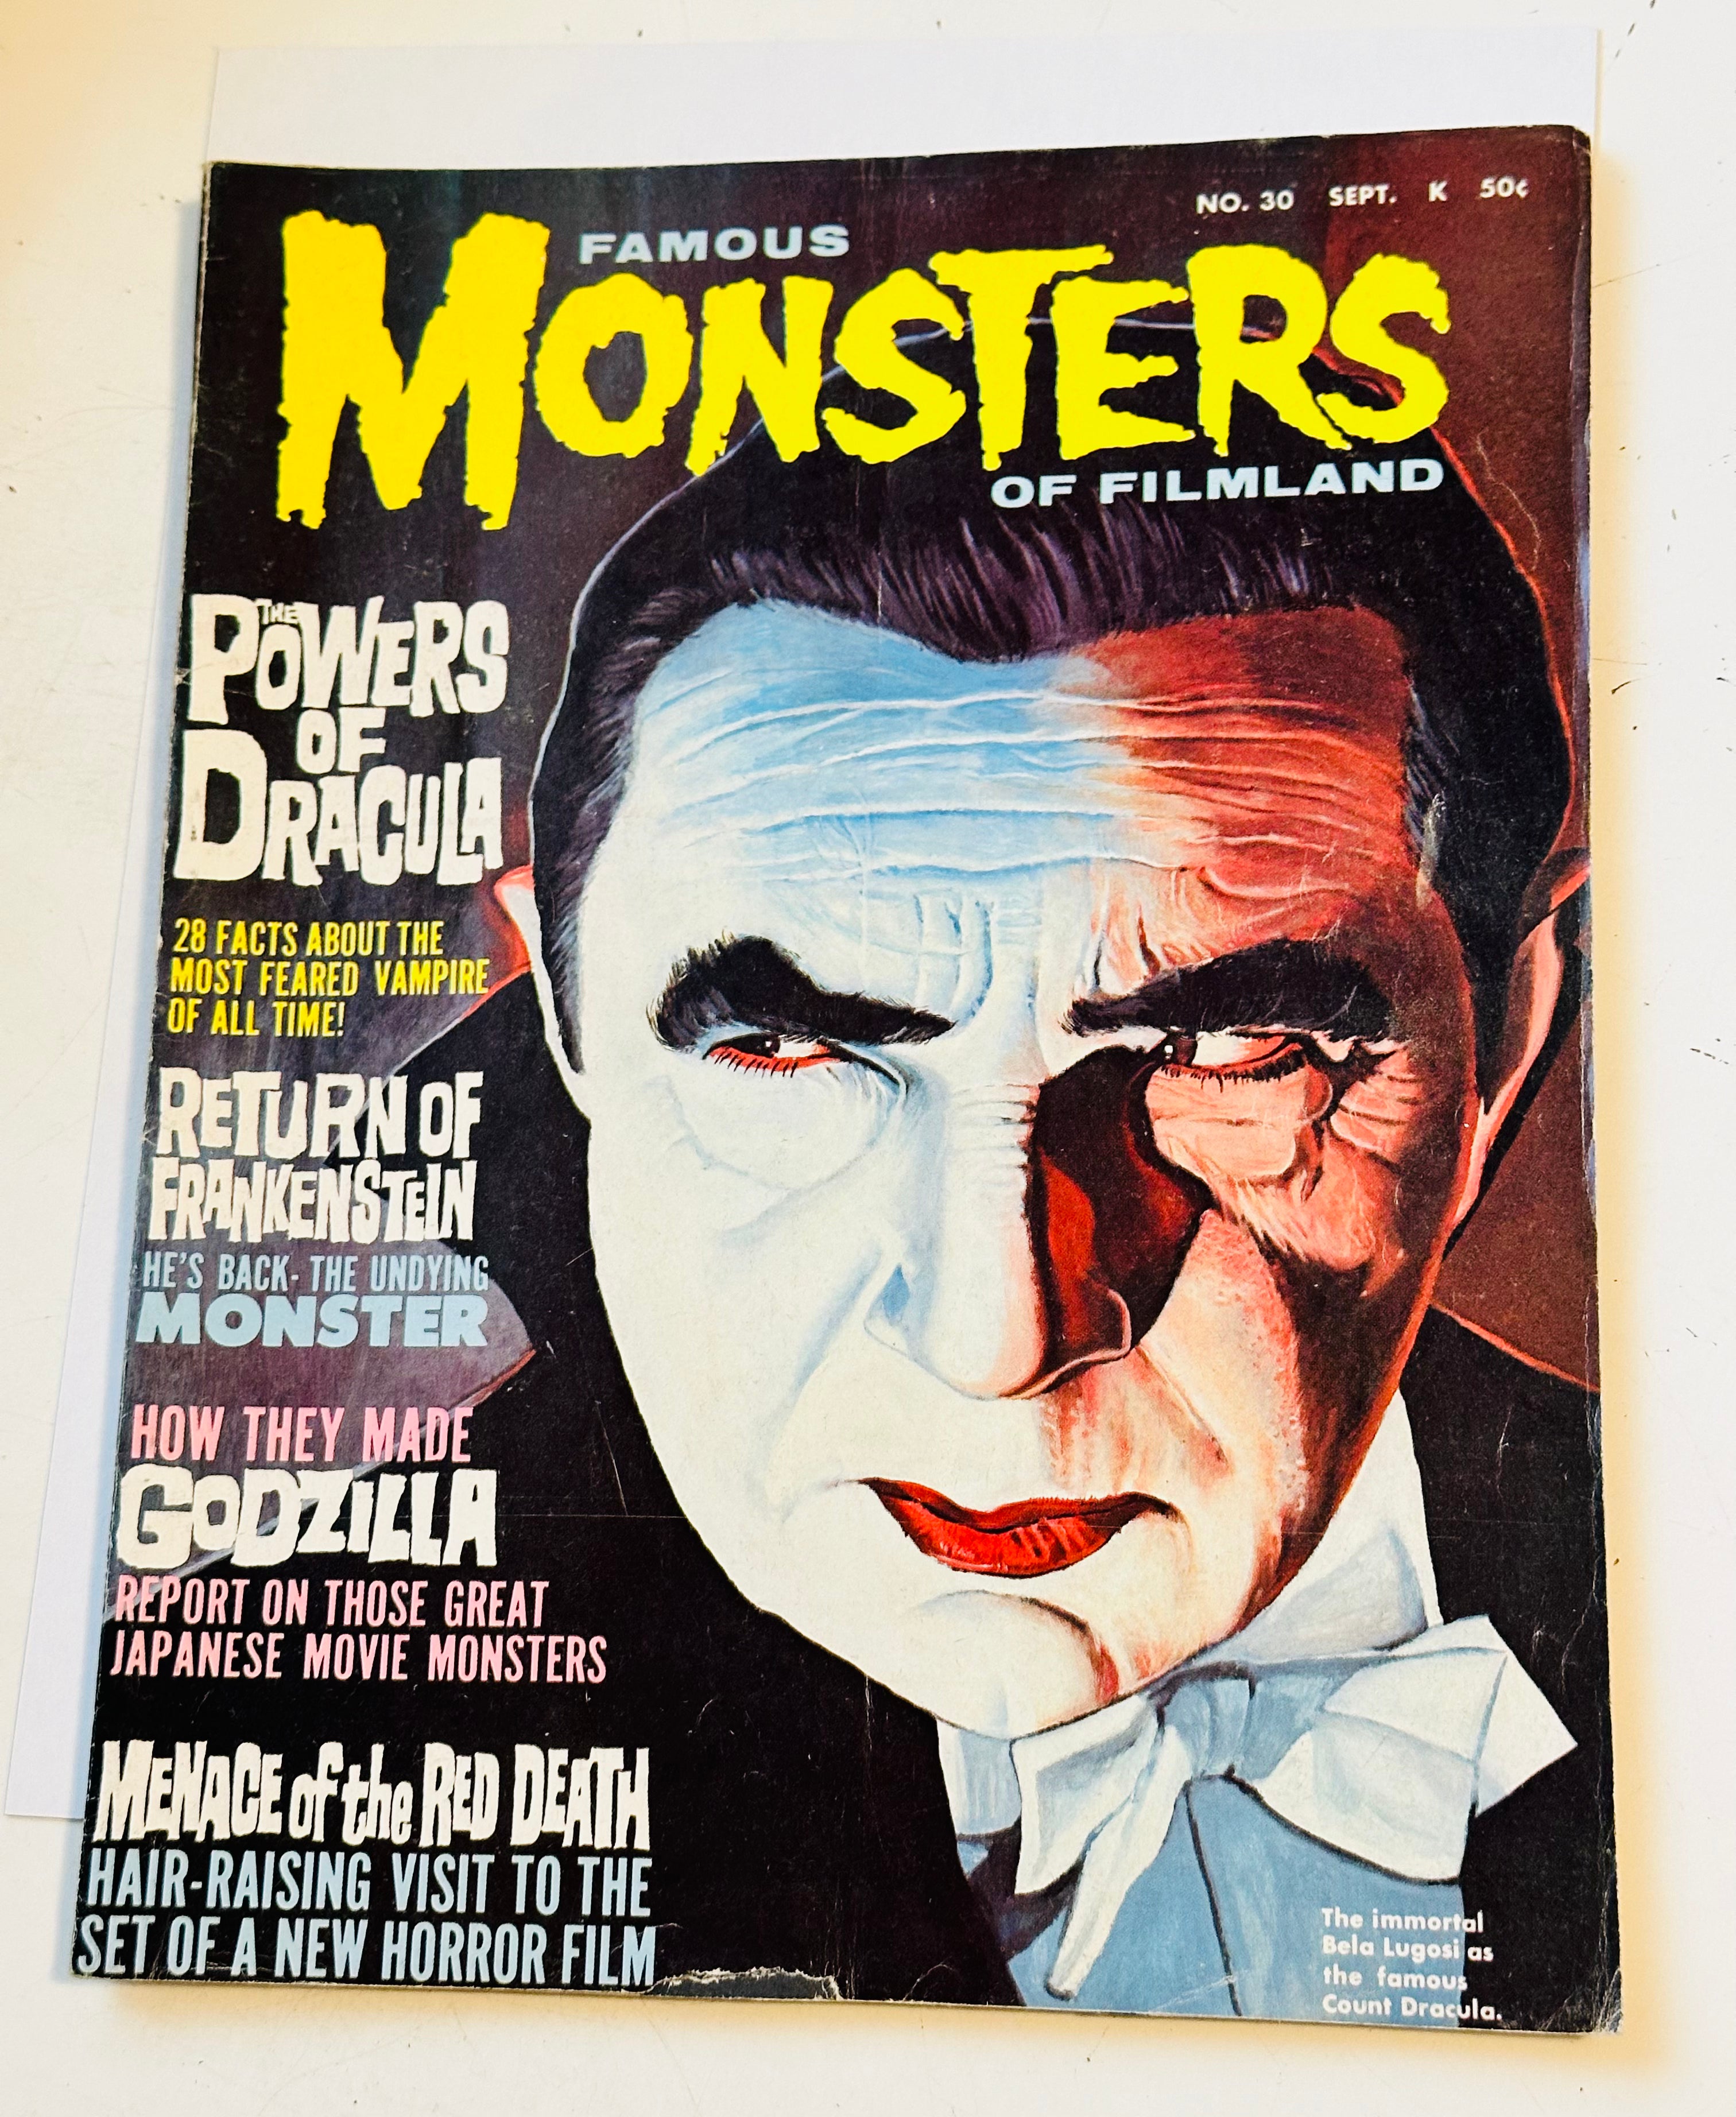 Famous monsters of filmland #30. High grade Vf or better condition 1964